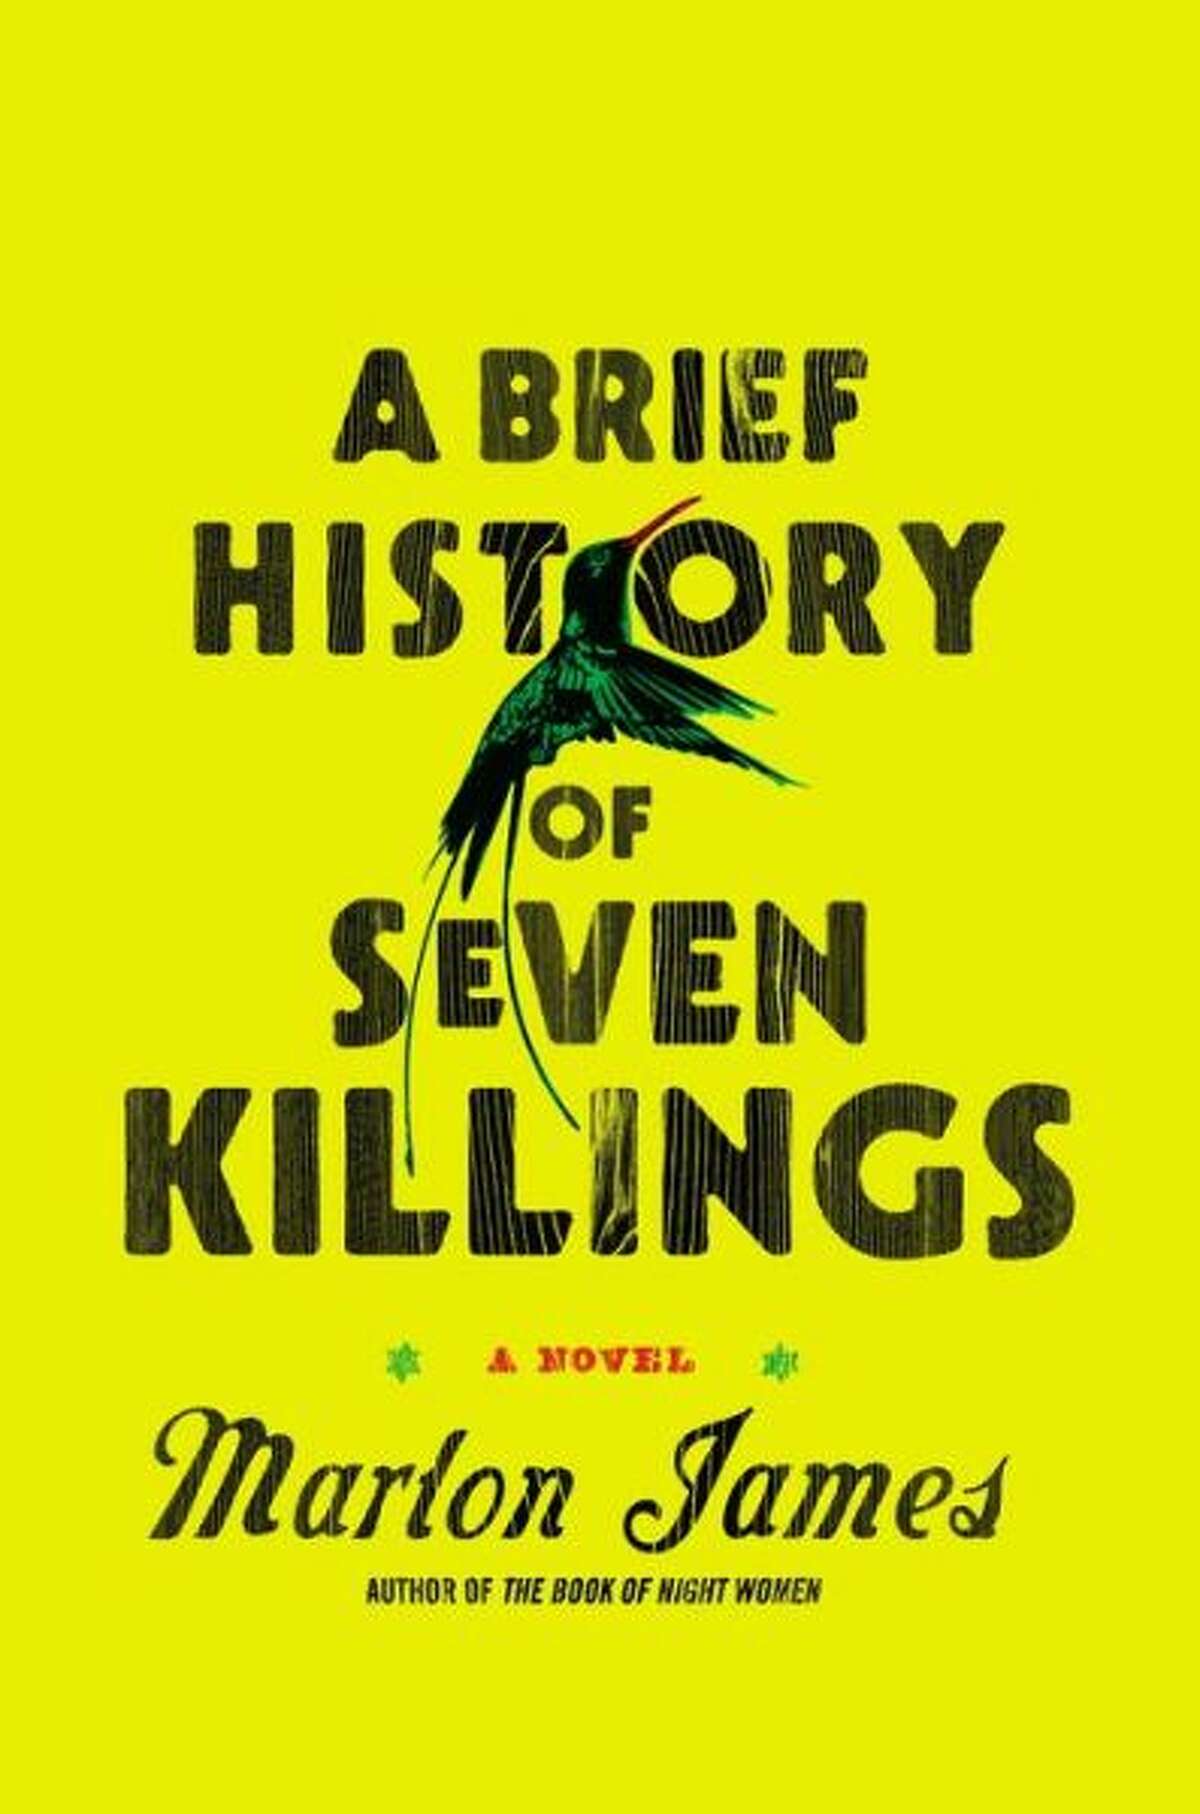 Fiction:"A Brief History of Seven Killings" by Marlon James. Anchored by the attempted 1976 assassination of Bob Marley, who is referred to as "the Singer" throughout, James' story is narrated by more than a dozen voices, including a gangster, a boy soldier, a CIA station chief and a middle-class woman who emigrates to the U.S. This is a book about organized crime in Jamaica, and James' stylistic daring gives it an immediate, unforgettable power. (Riverhead)